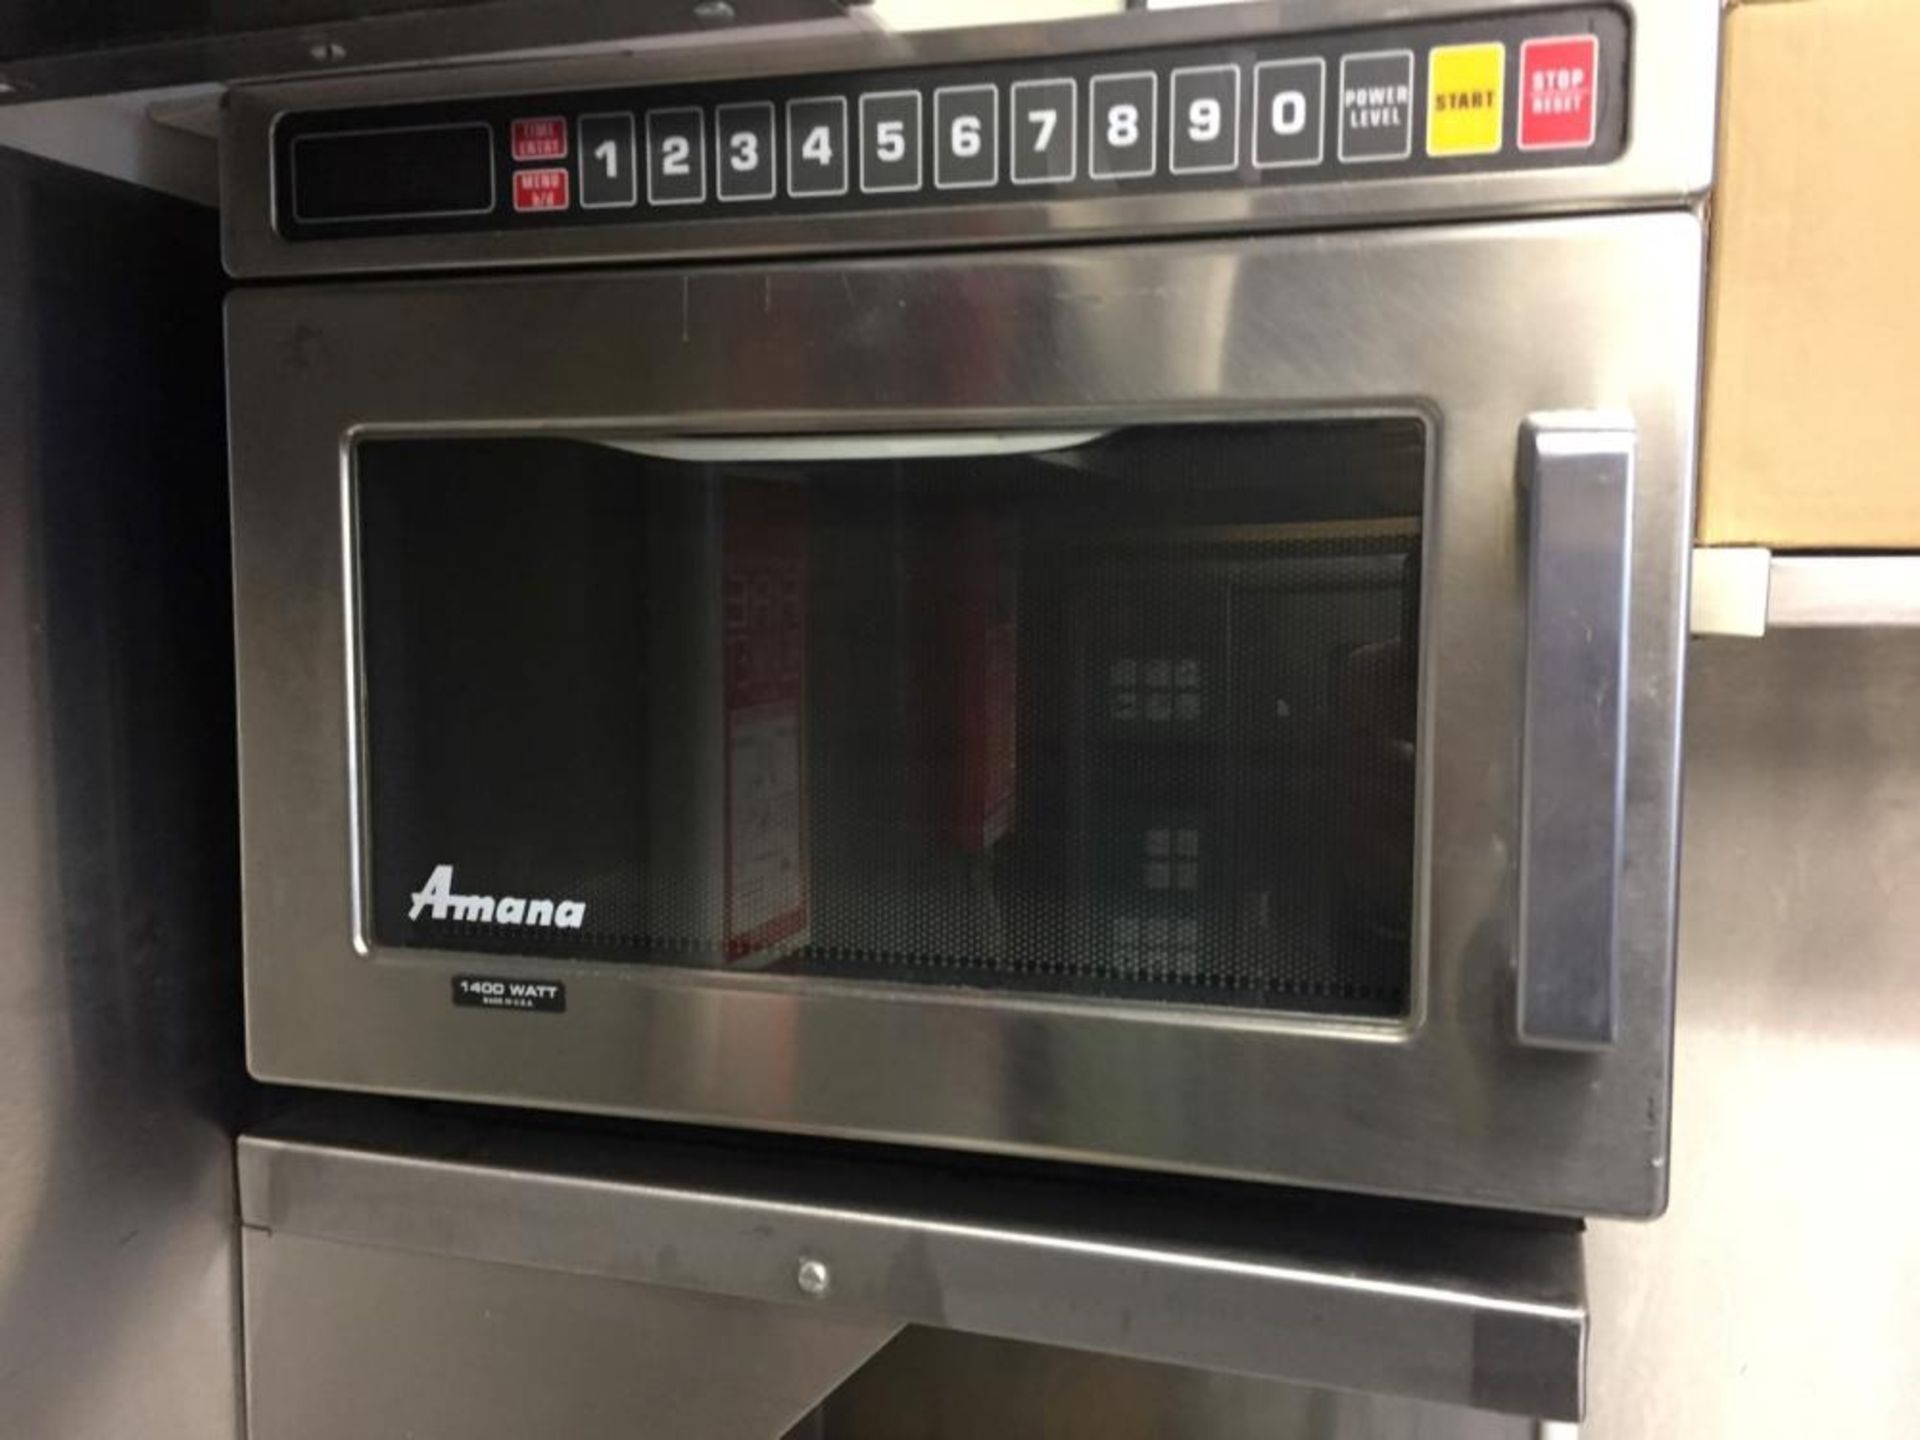 1 x AMANA Commercial 1400 Watt Microwave Oven - Stainless Steel - Dimensions: W42 x D50 x H34cm - Ma